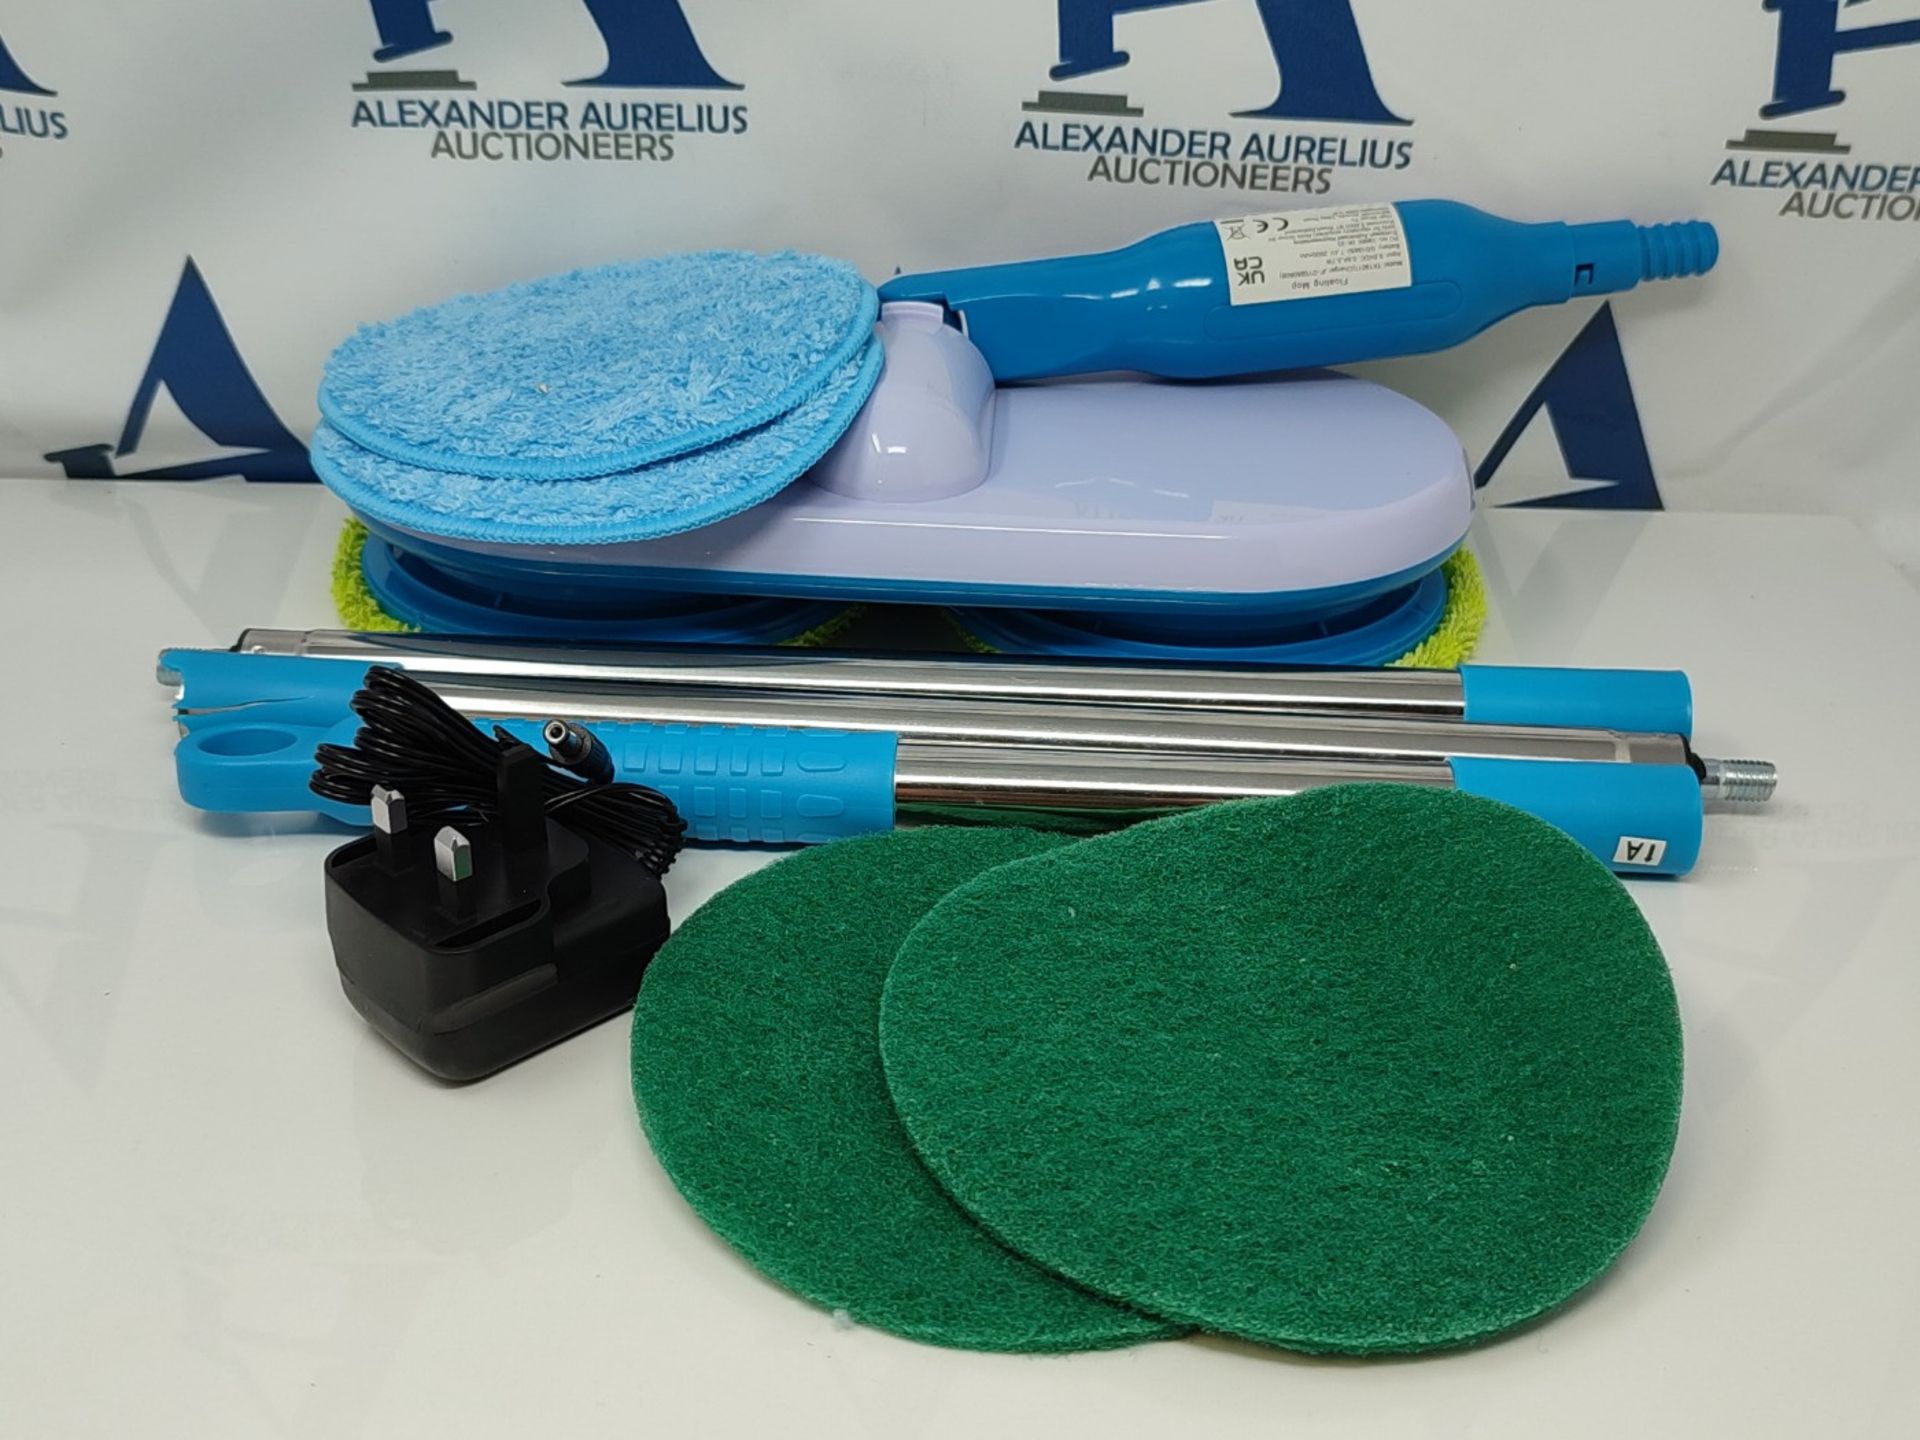 High Street TV Floating Mop - Motorised Cordless & Rechargeable - Spinning Mop - Inclu - Image 3 of 6